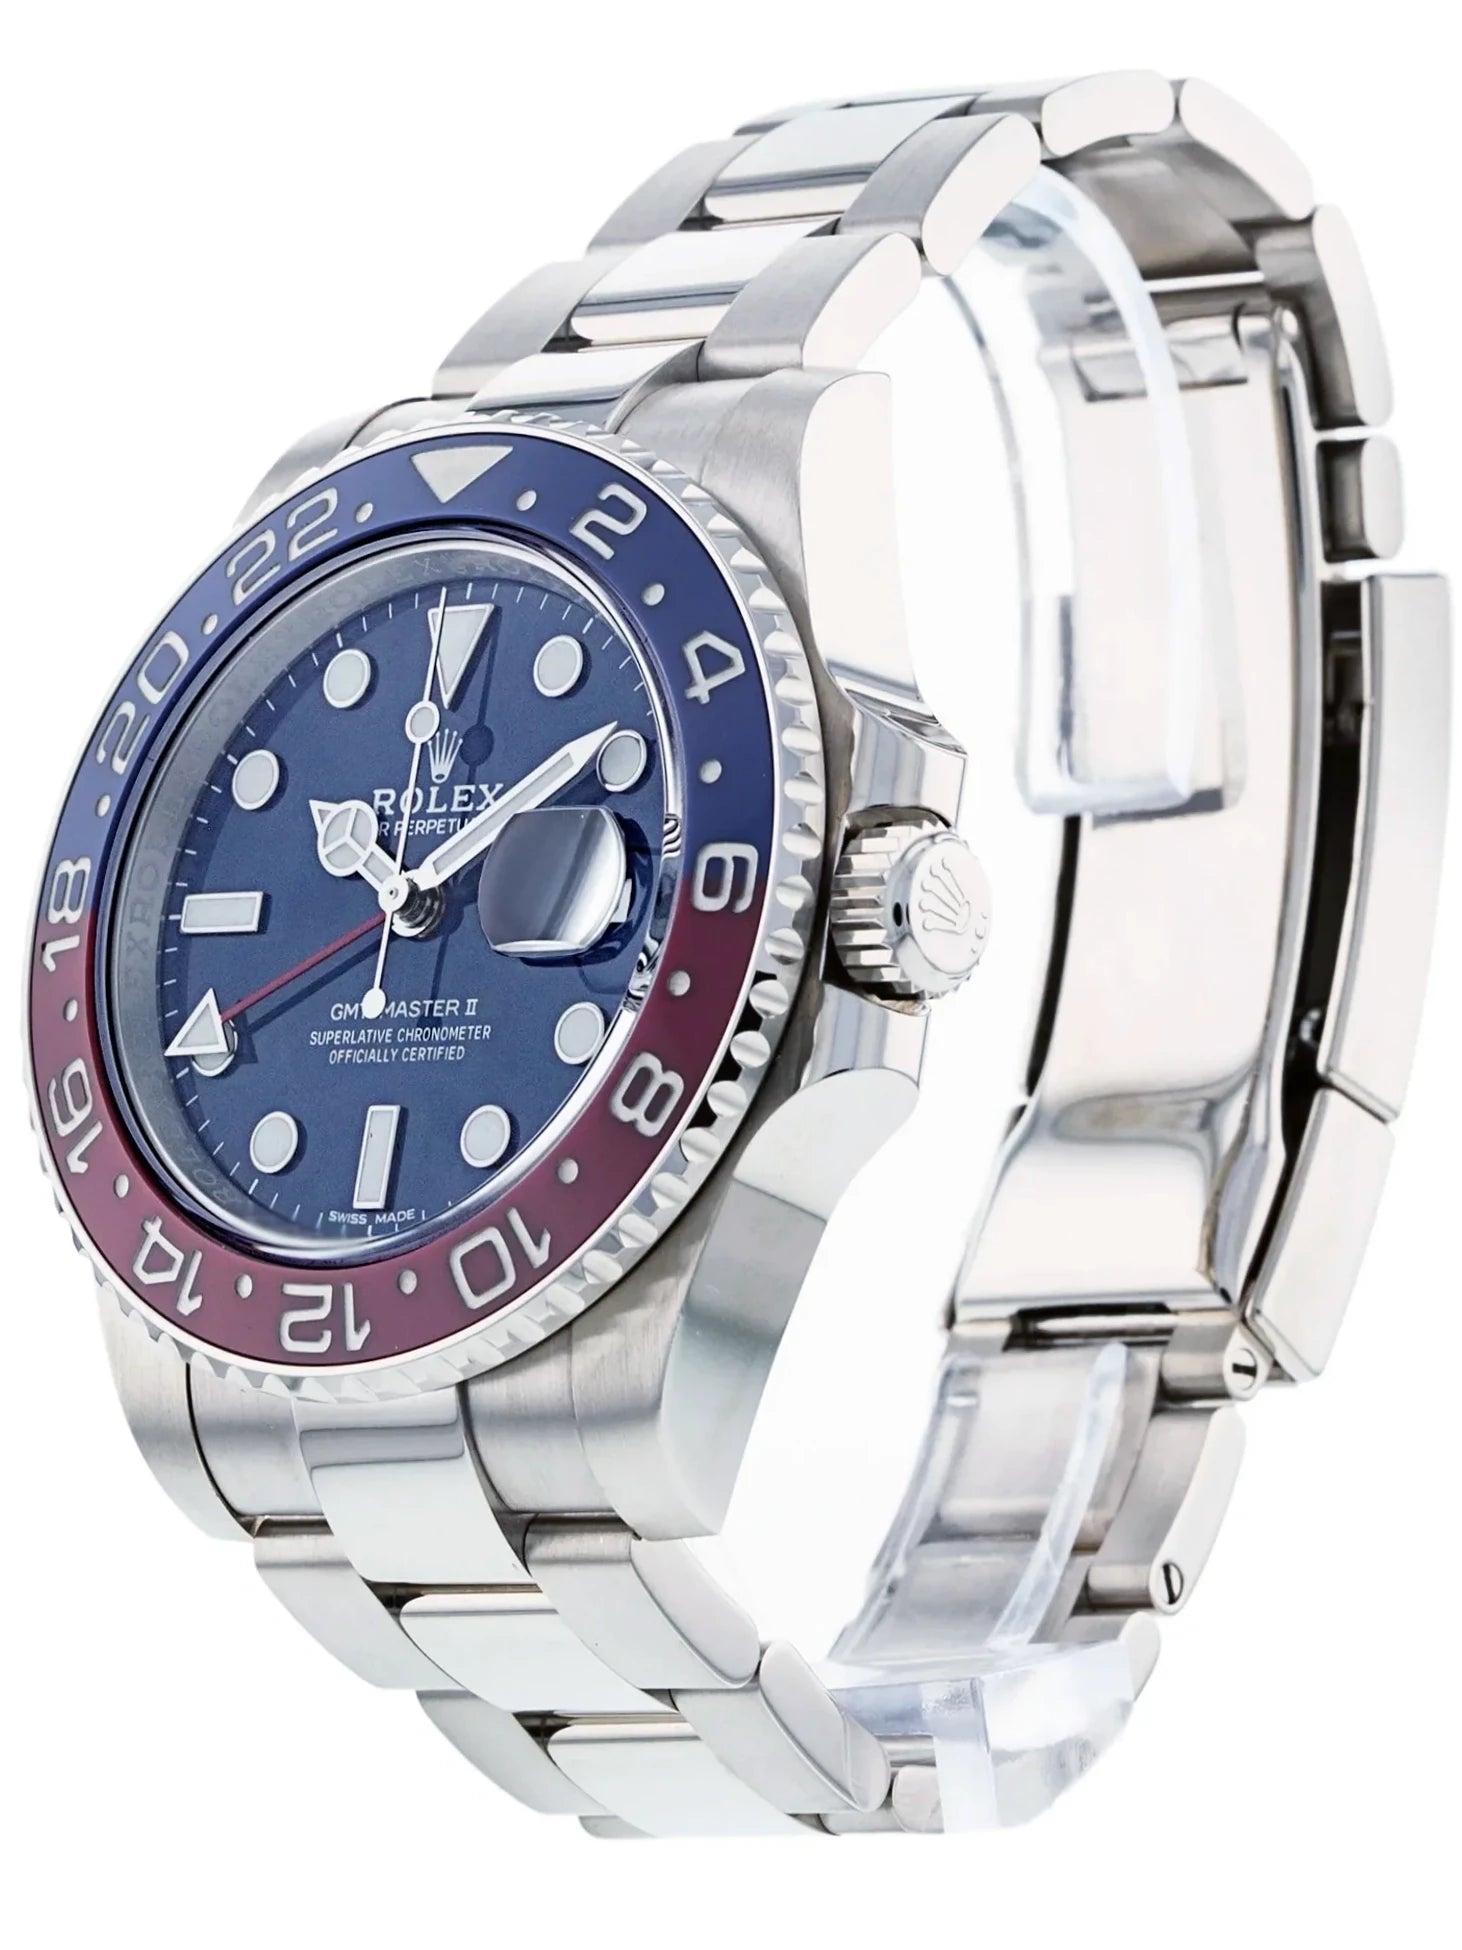 Men's Rolex 40mm GMT Master II White Gold Watch with Black Dial and Pepsi Bezel. (Pre-Owned 116719BLRO)